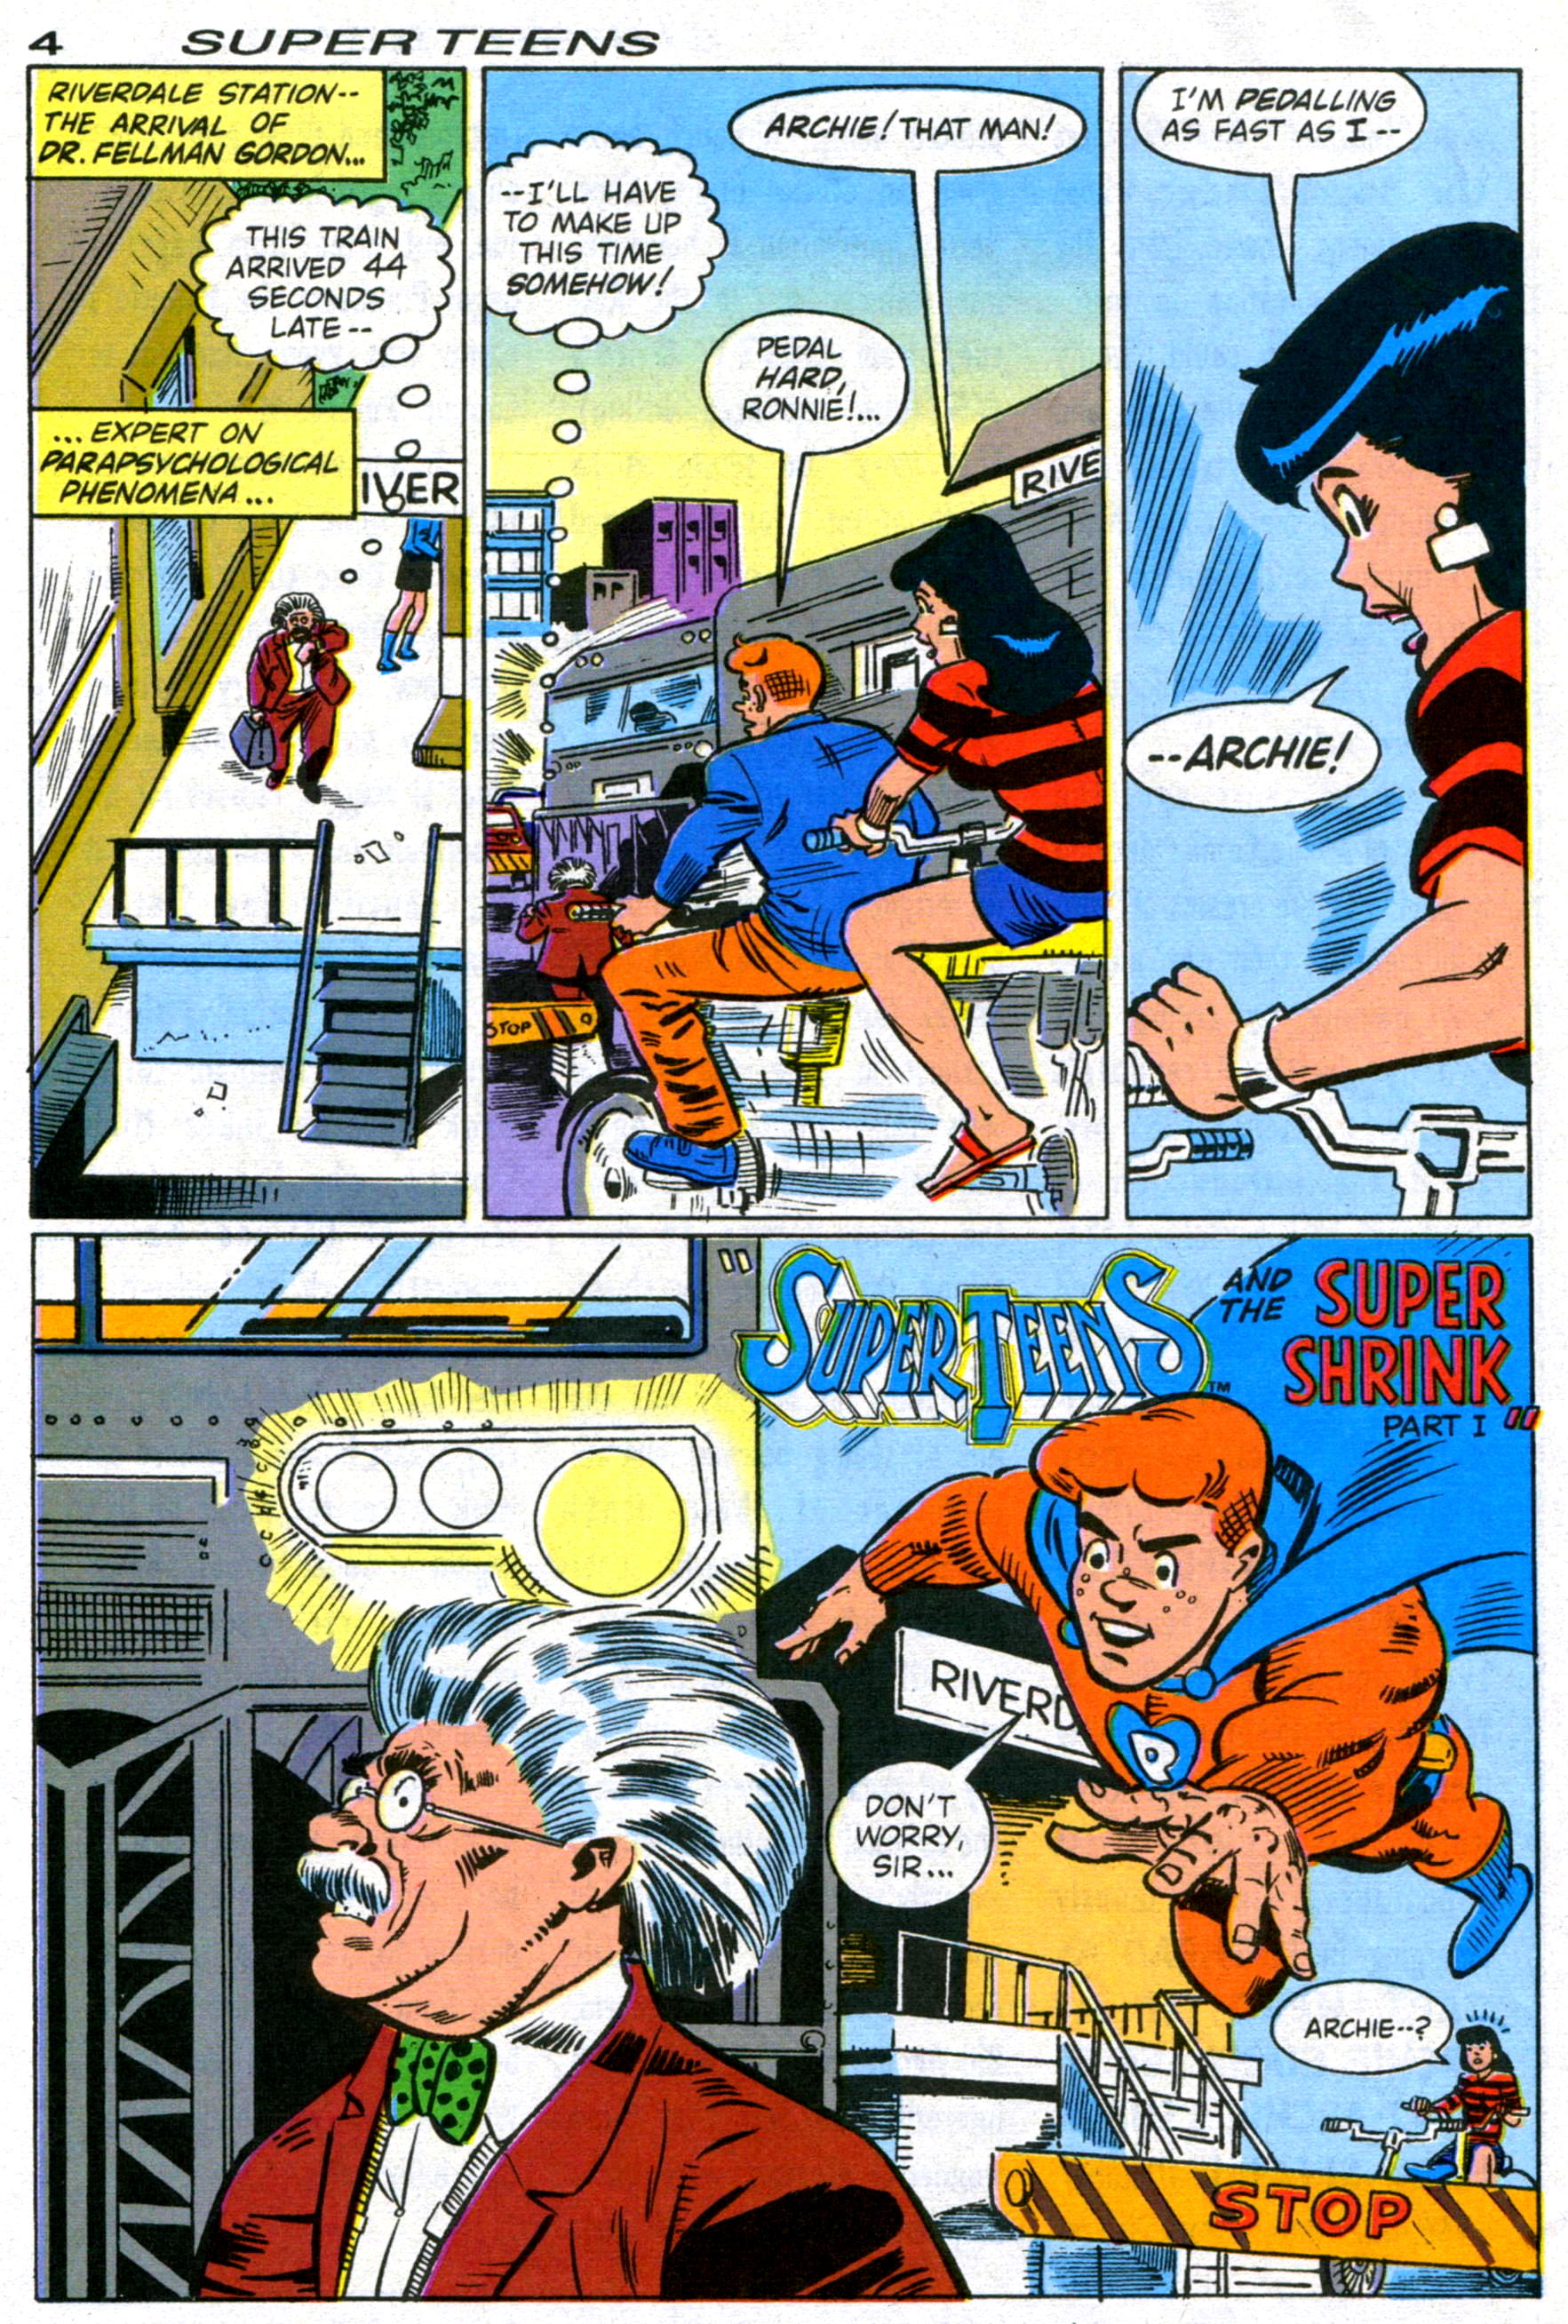 Read online Archie's Super Teens comic -  Issue #1 - 6